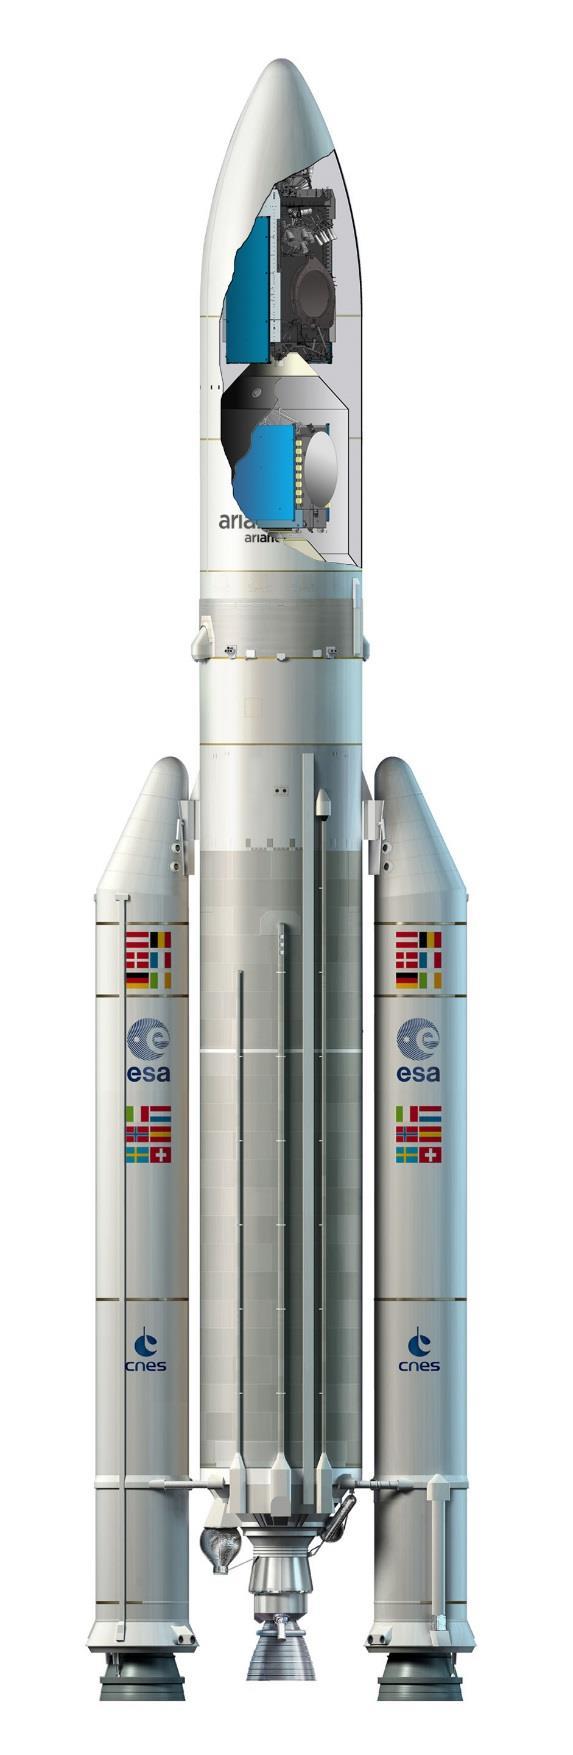 ARIANE 5 ECA LAUNCH VEHICLE The launcher is delivered to Arianespace by ArianeGroup as production prime contractor. Fairing (RUAG Space): 17 m. Mass: 2.4 t.